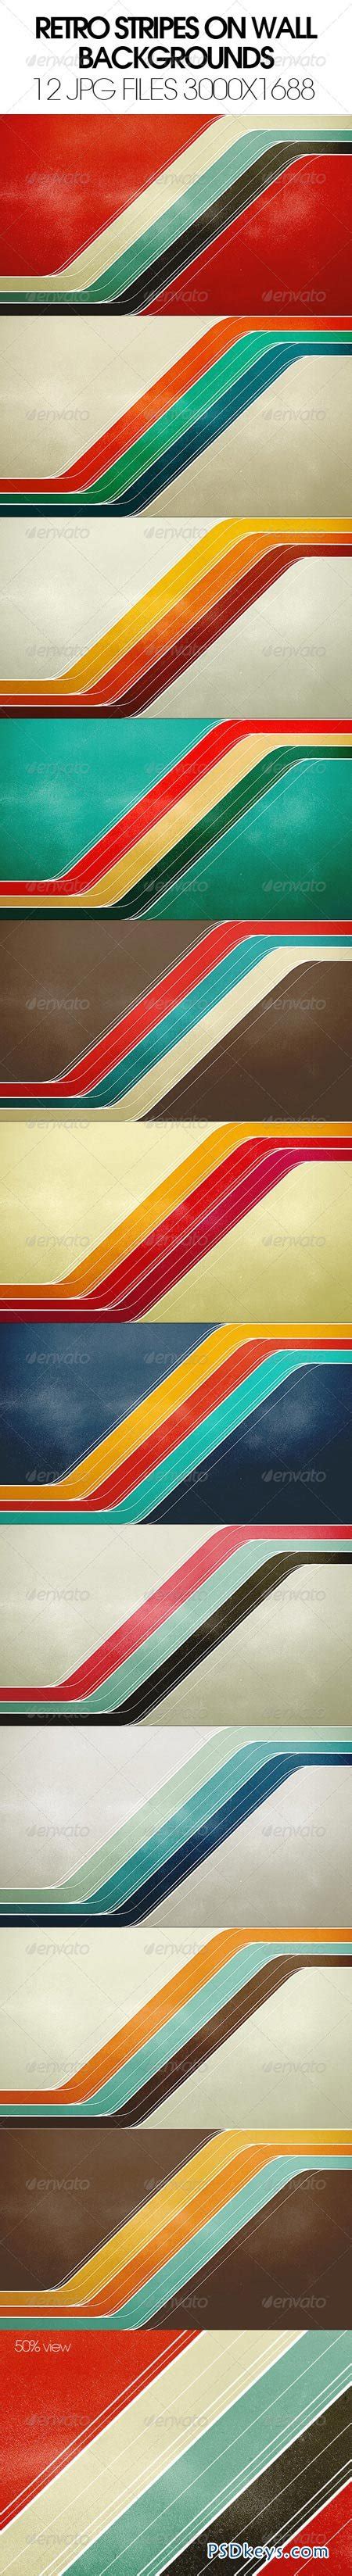 Retro Stripes Backgrounds 5085484 Free Download Photoshop Vector